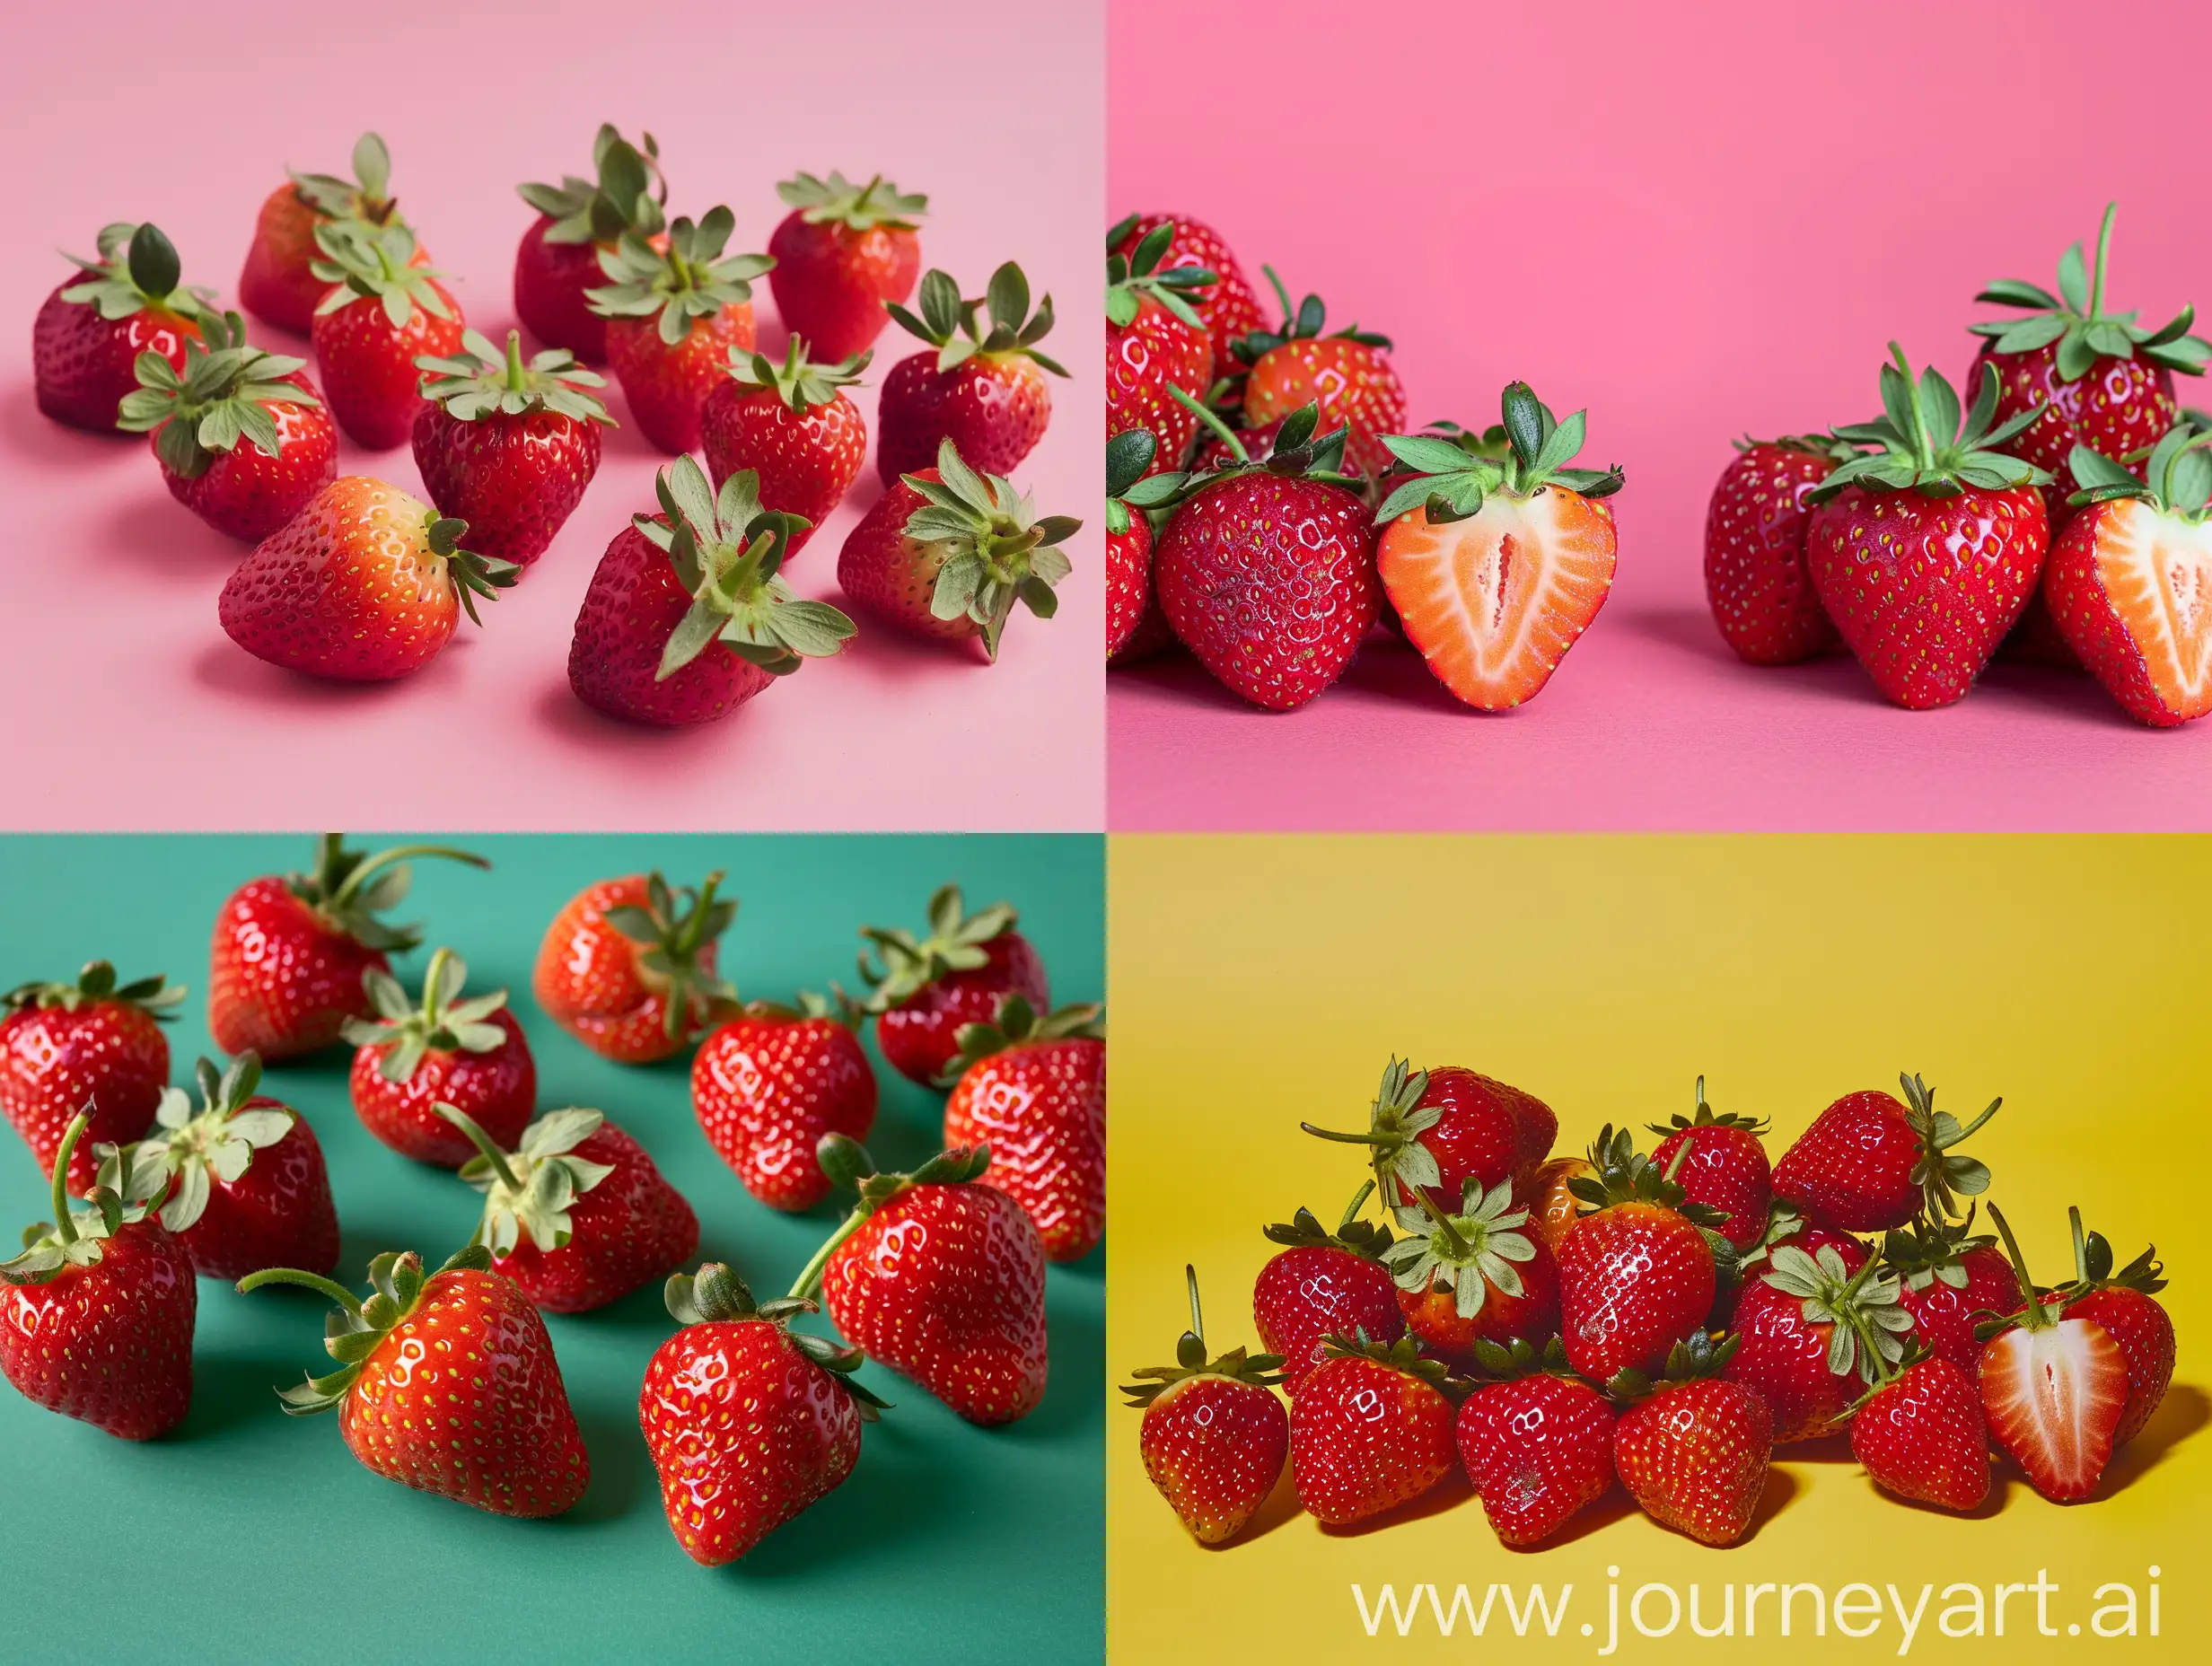 Vibrant-Strawberry-Studio-Photography-with-Playful-Fruits